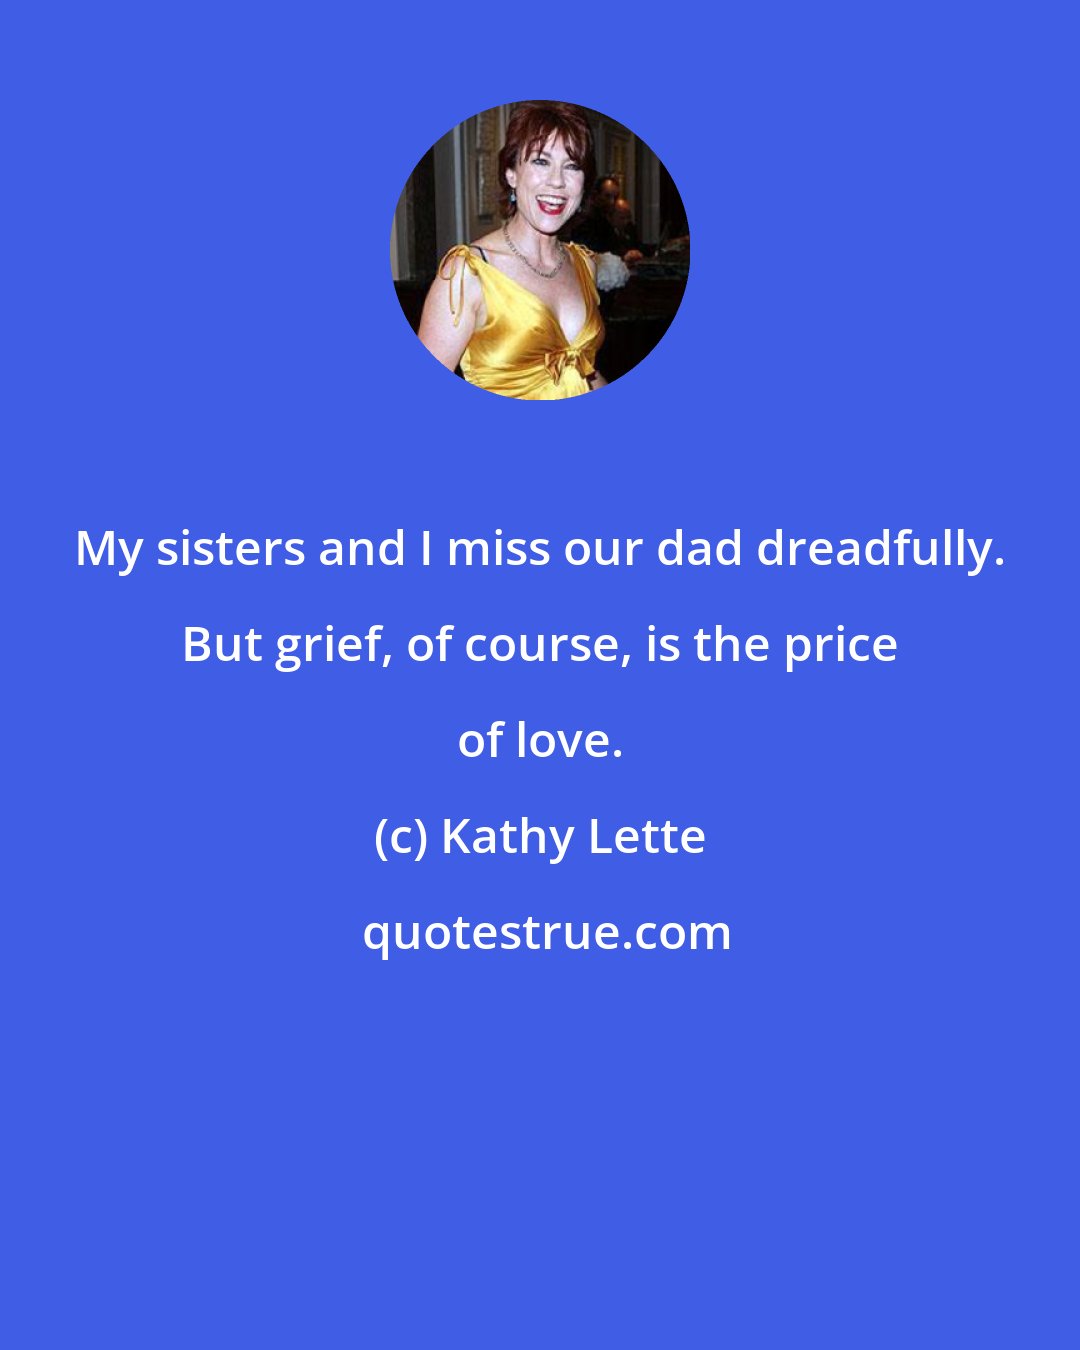 Kathy Lette: My sisters and I miss our dad dreadfully. But grief, of course, is the price of love.